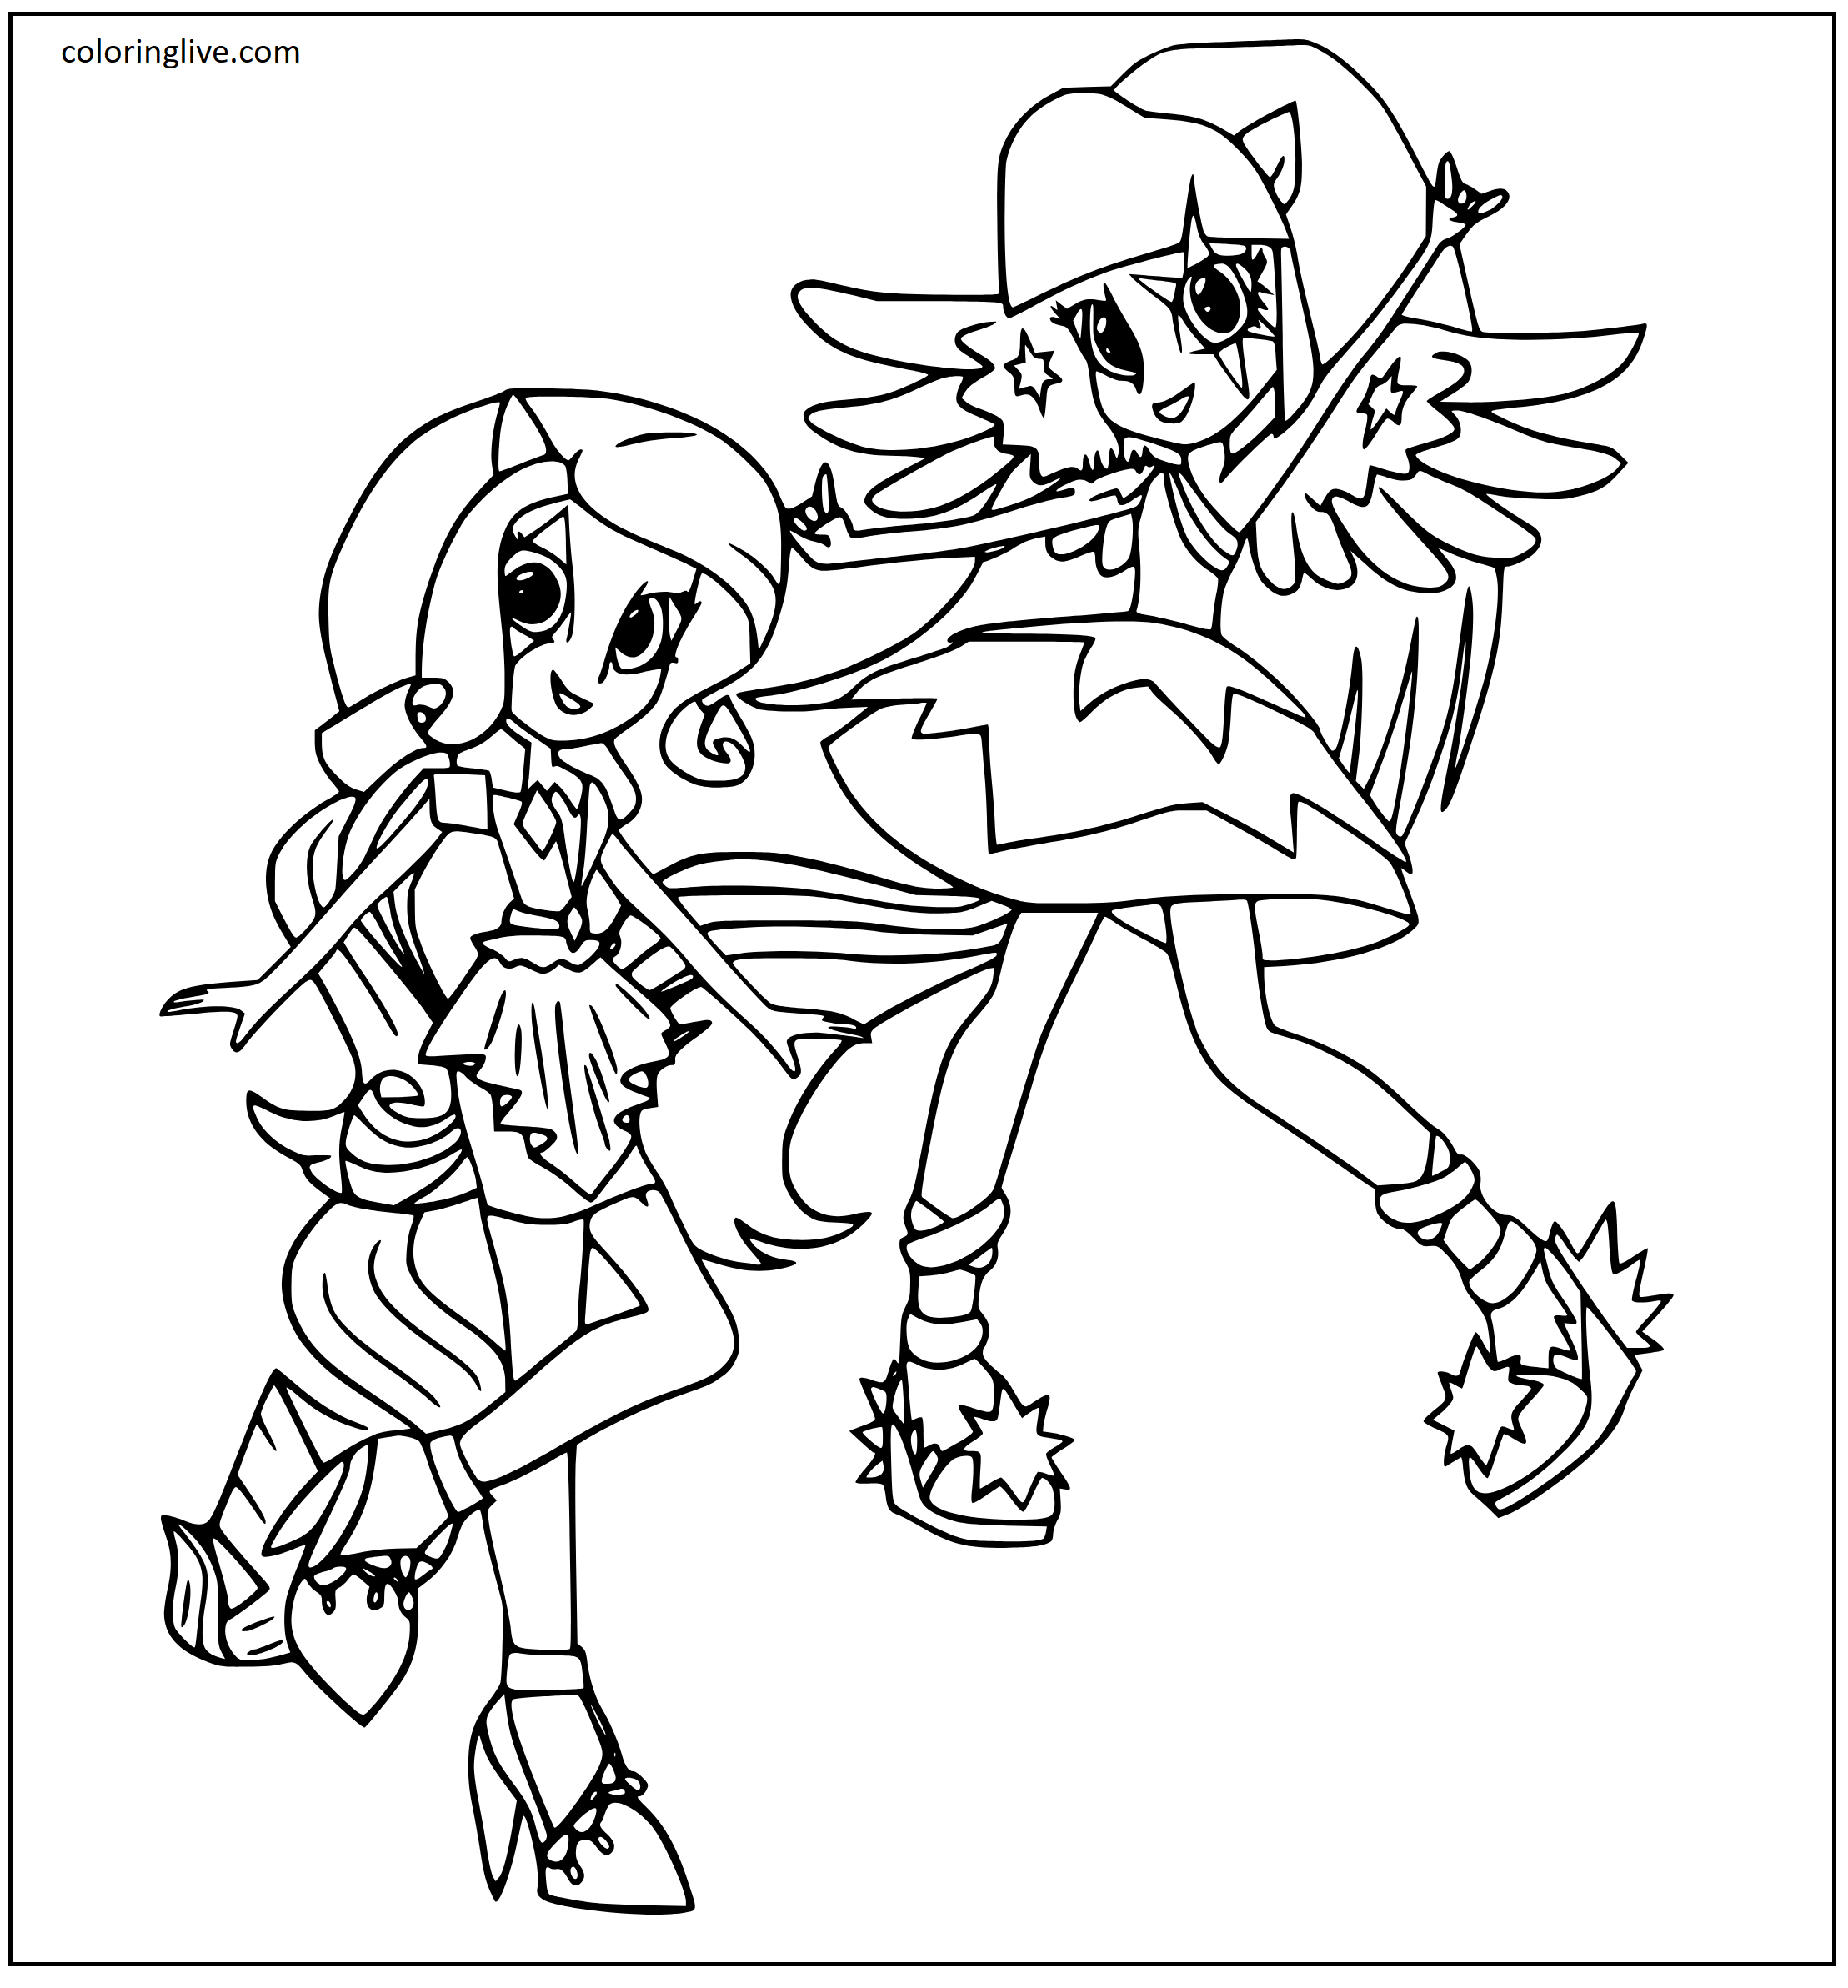 Printable Rarity and Sparkle Coloring Page for kids.